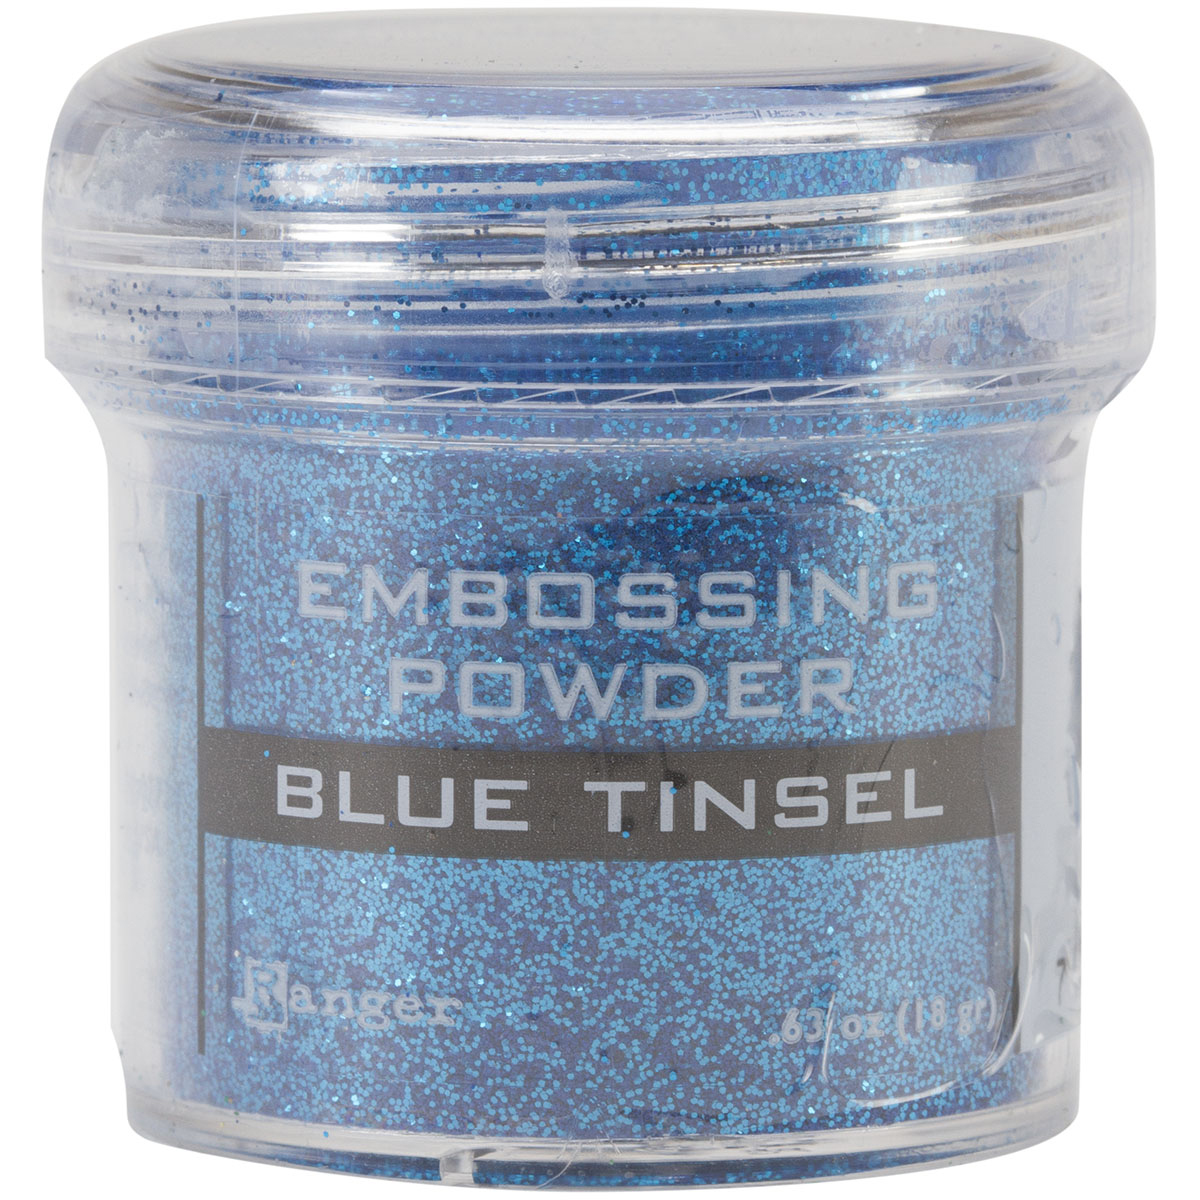 Embossing Powder-Blue Tinsel - Picture 1 of 1